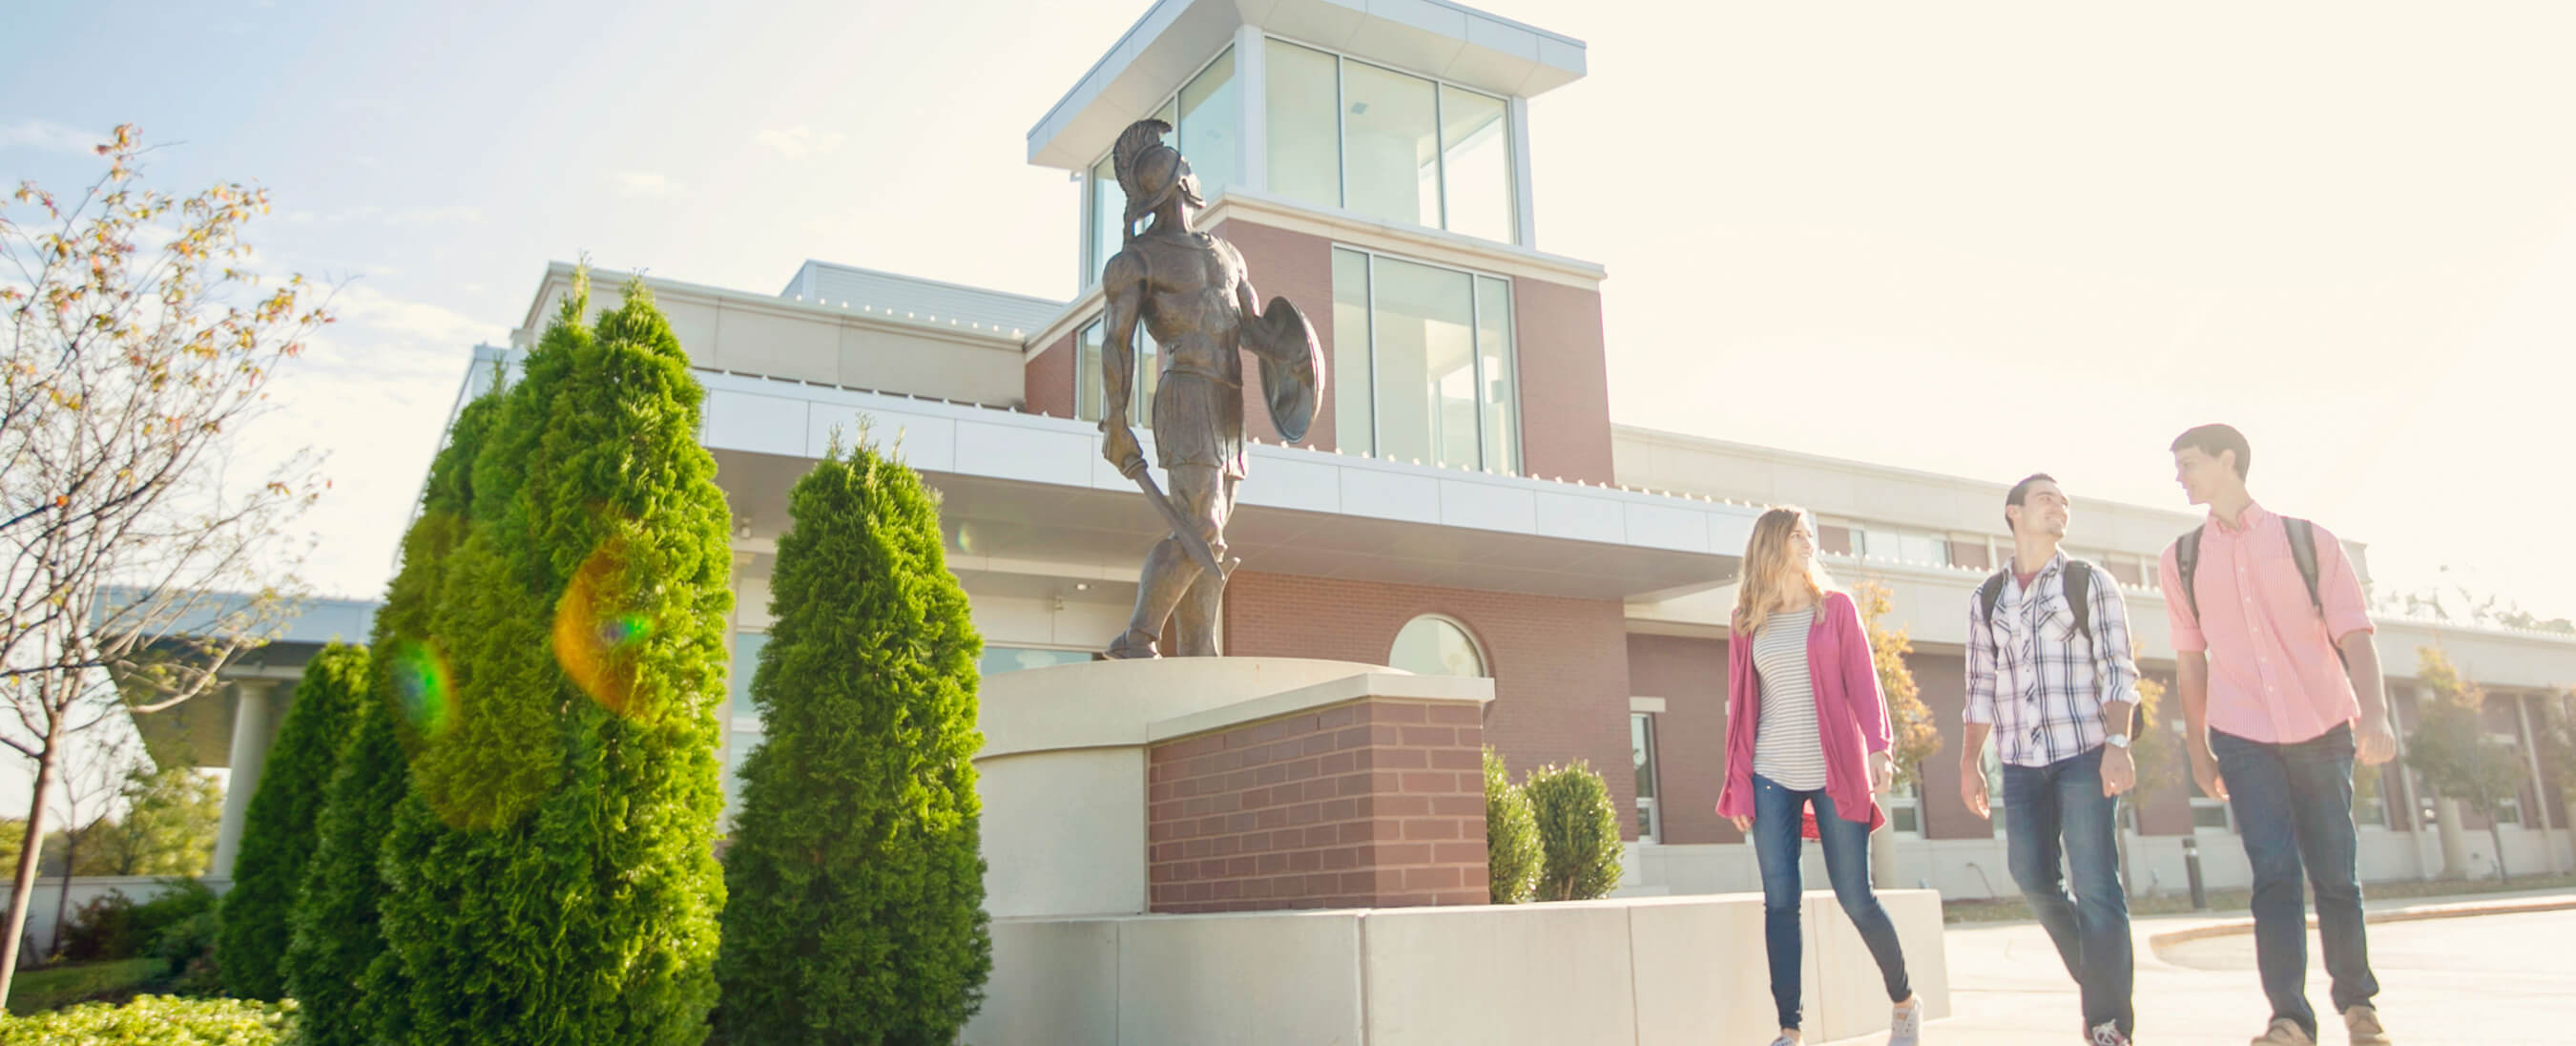 Students walking past MBU's Spartan statue on a bright day